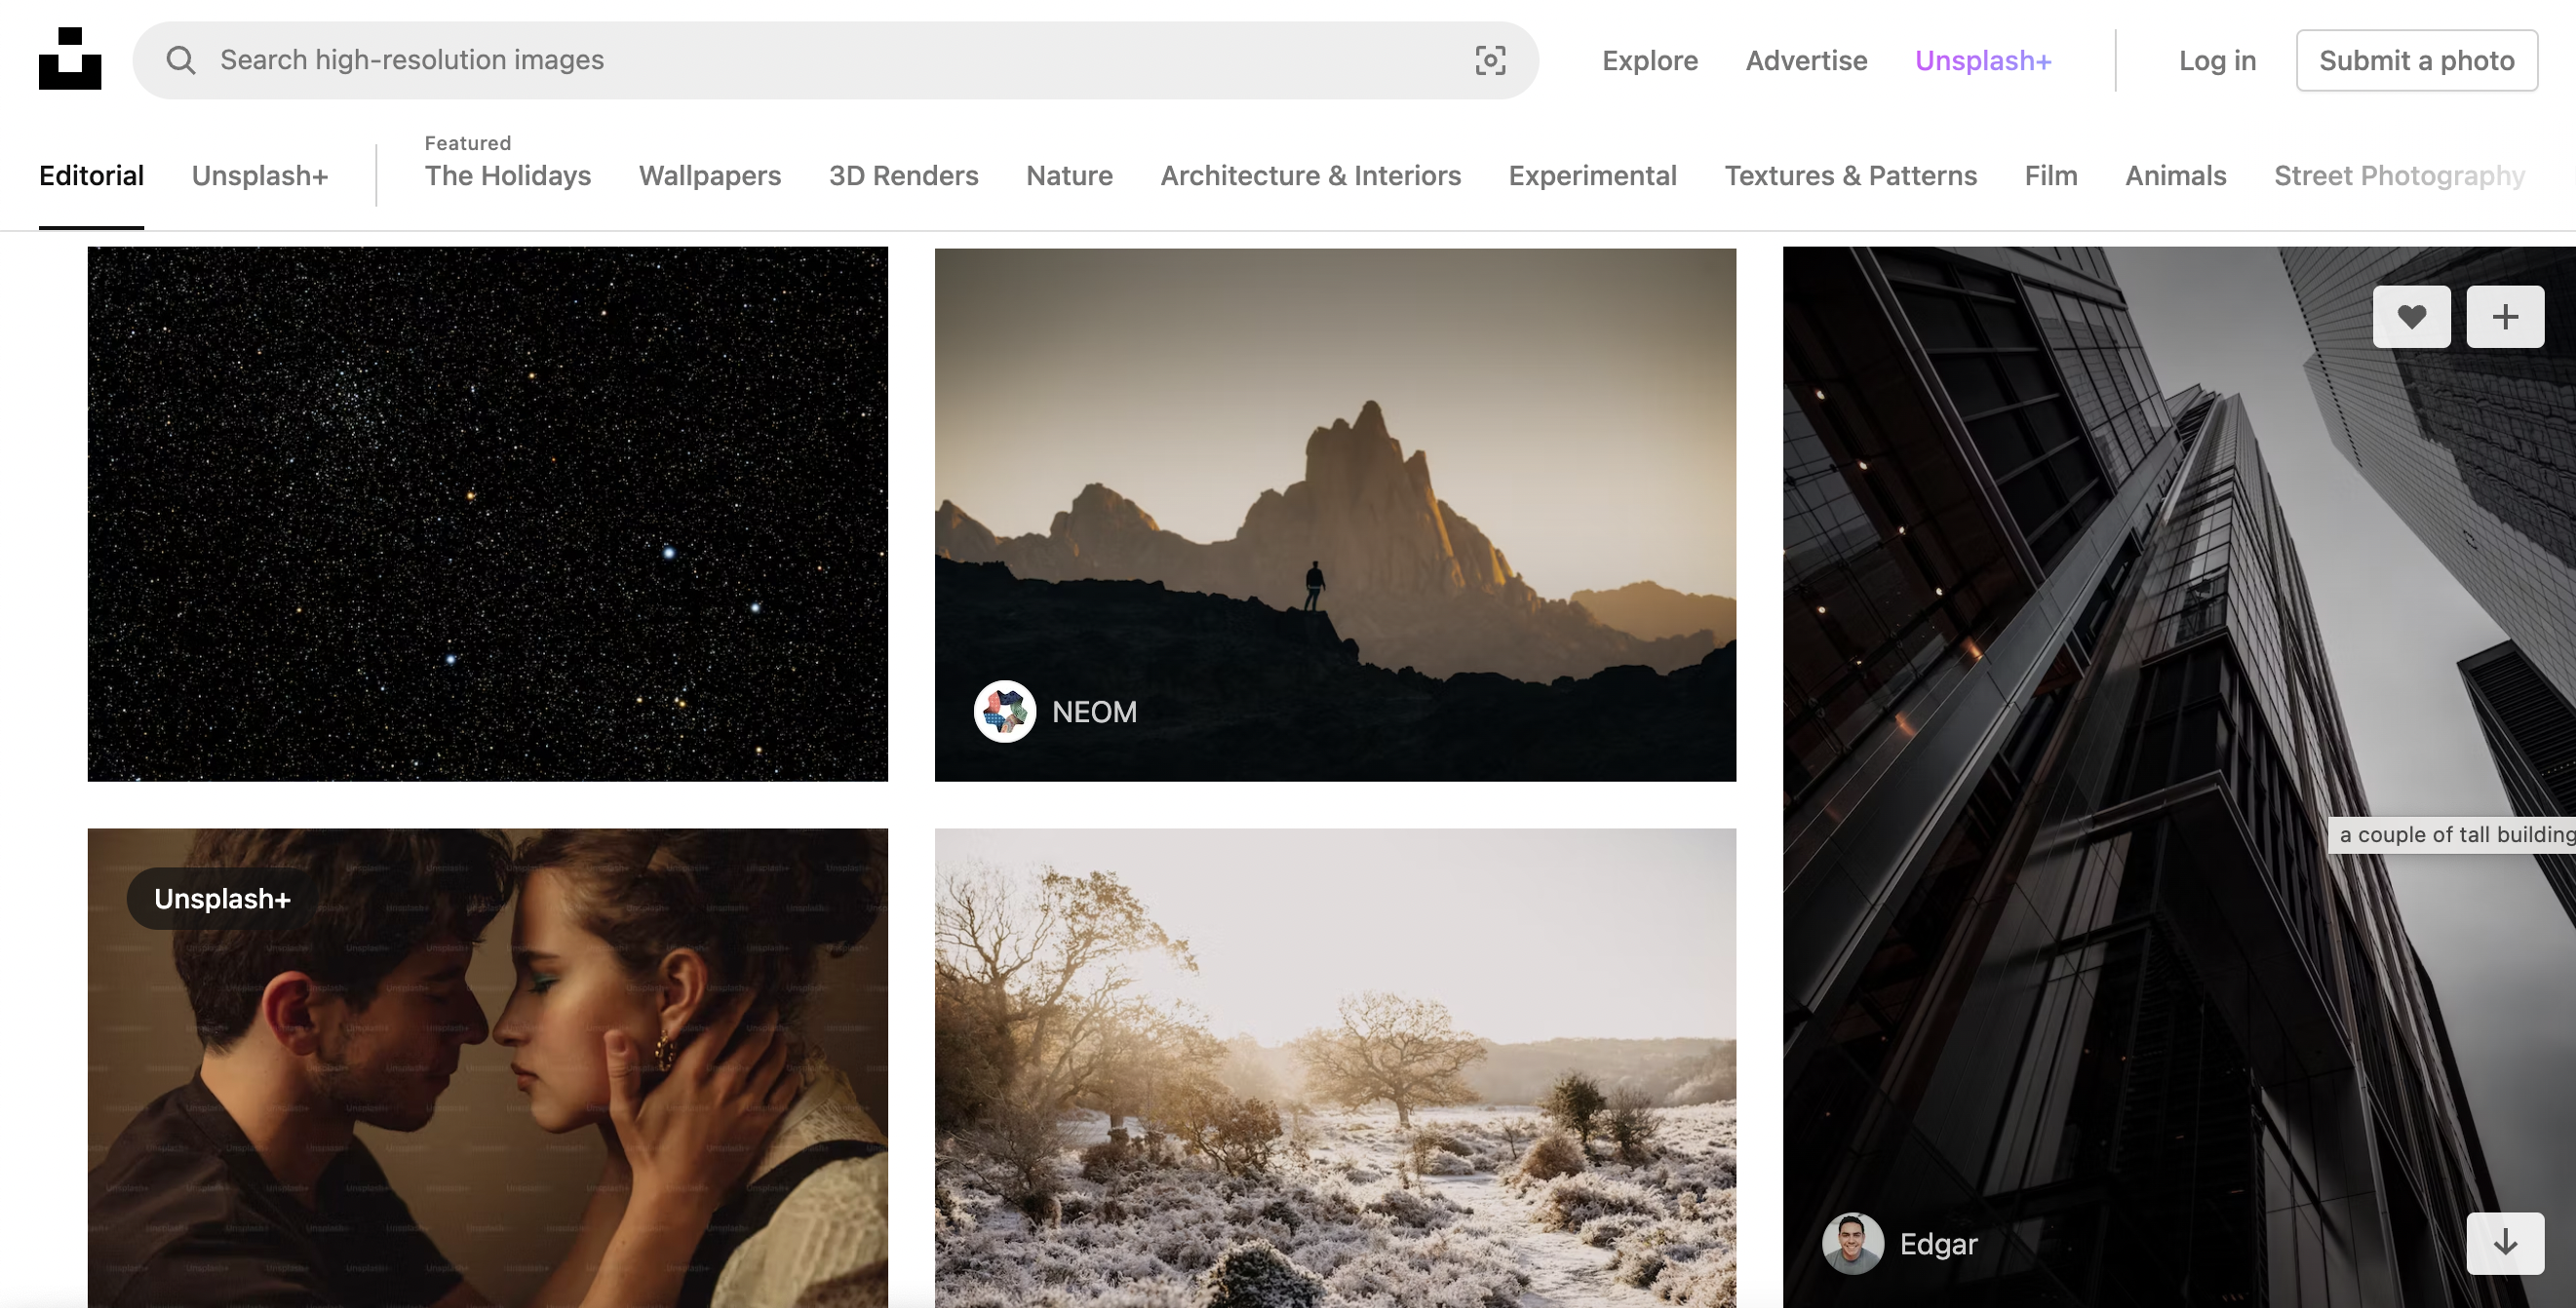 Unsplash search window with several sample stock images shown below